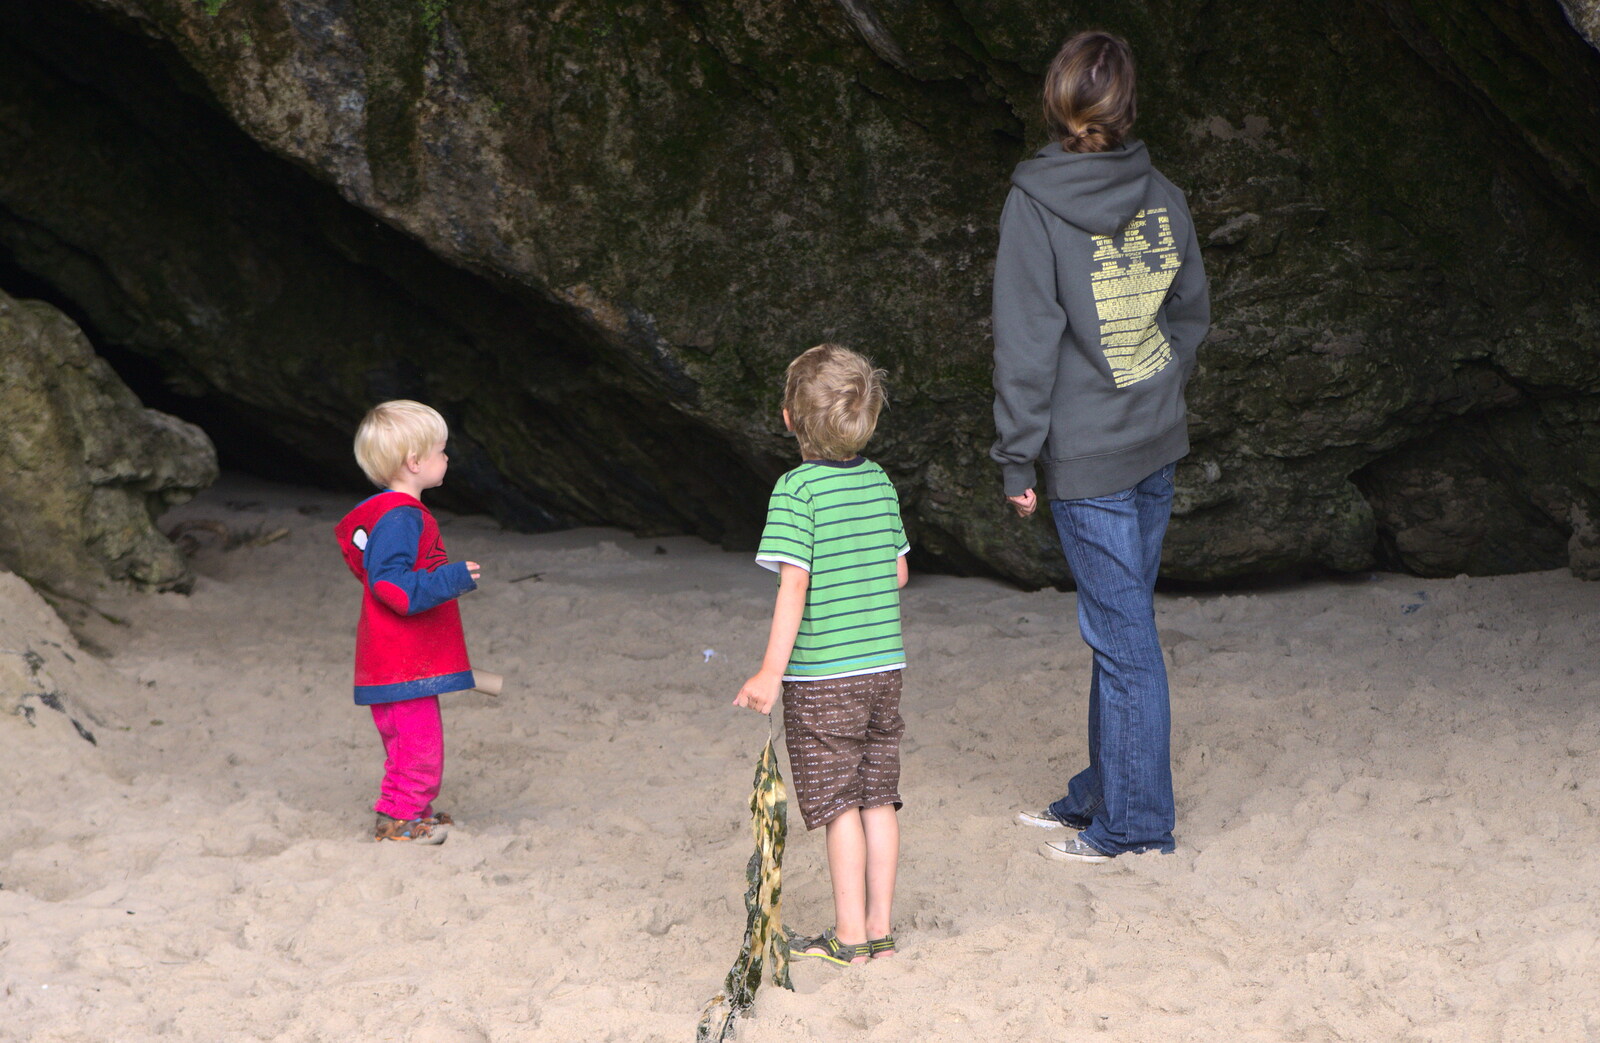 Harry, Fred and Isobel inspect the cave from Camping at Silver Strand, Wicklow, County Wicklow, Ireland - 7th August 2014